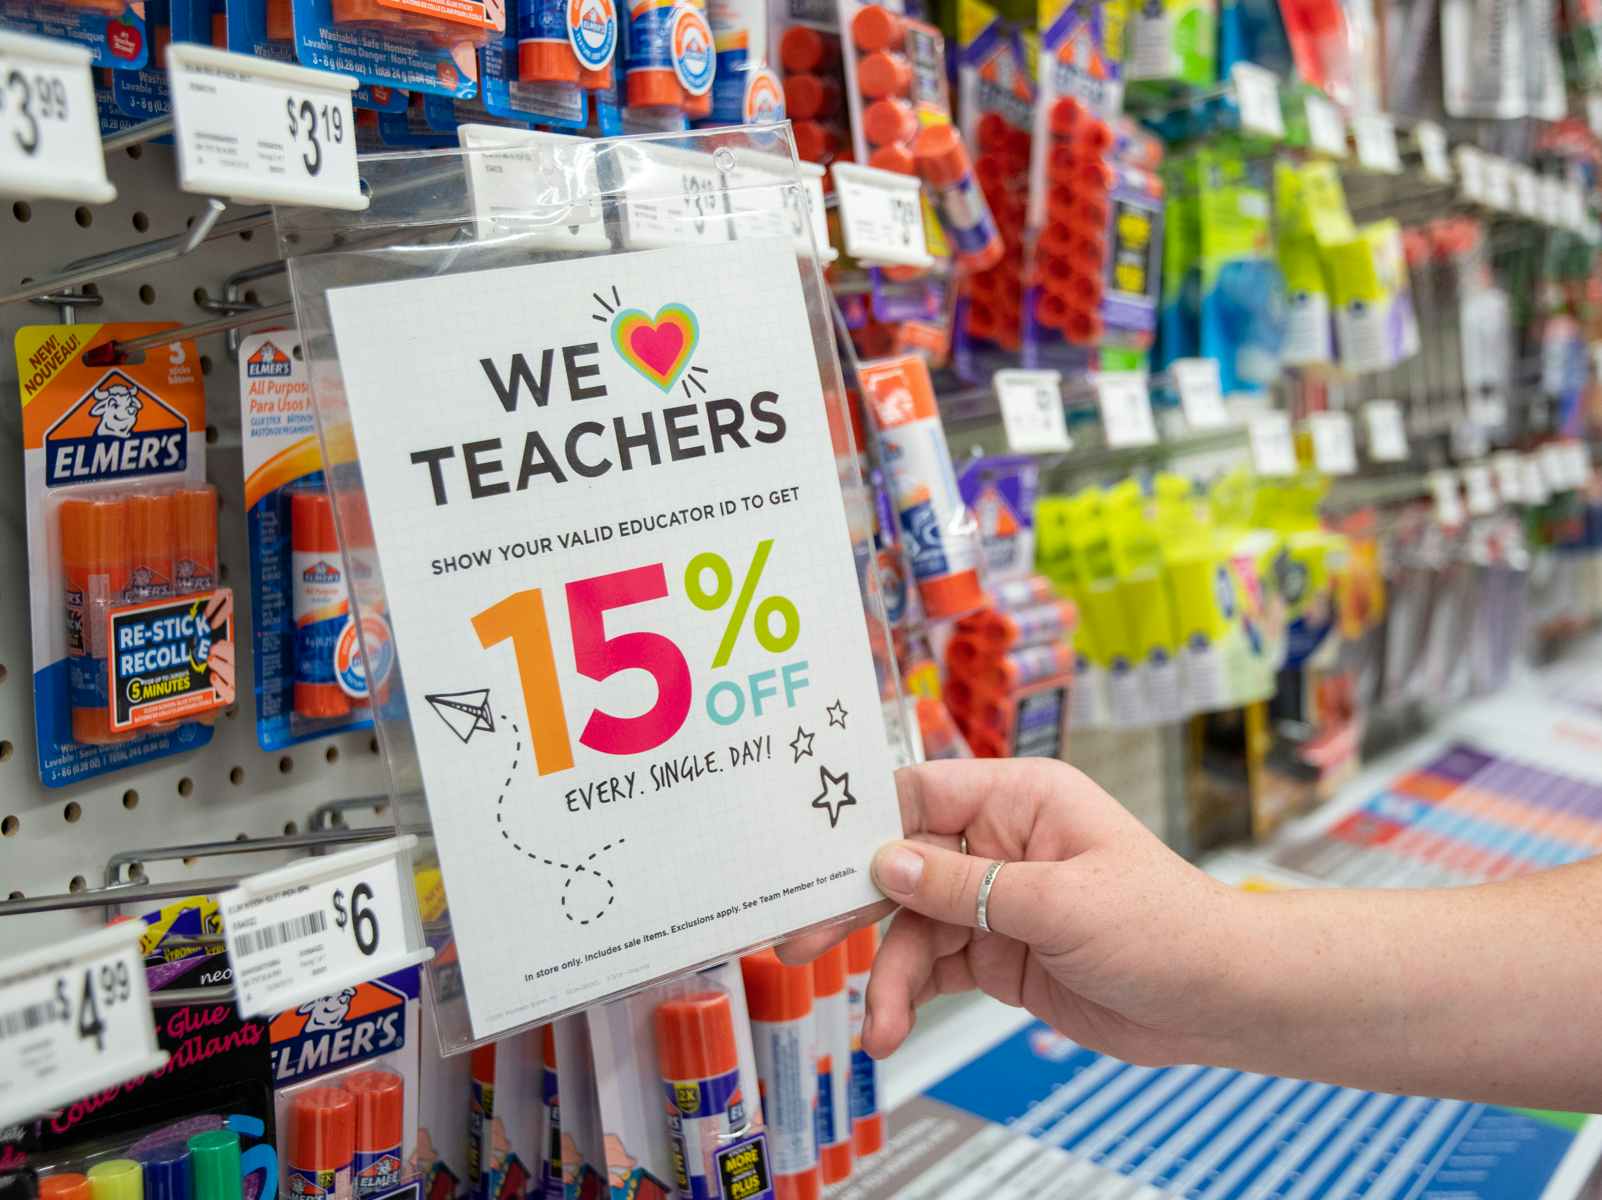 Teachers, military and seniors can get a 10-15% discount at Michaels.